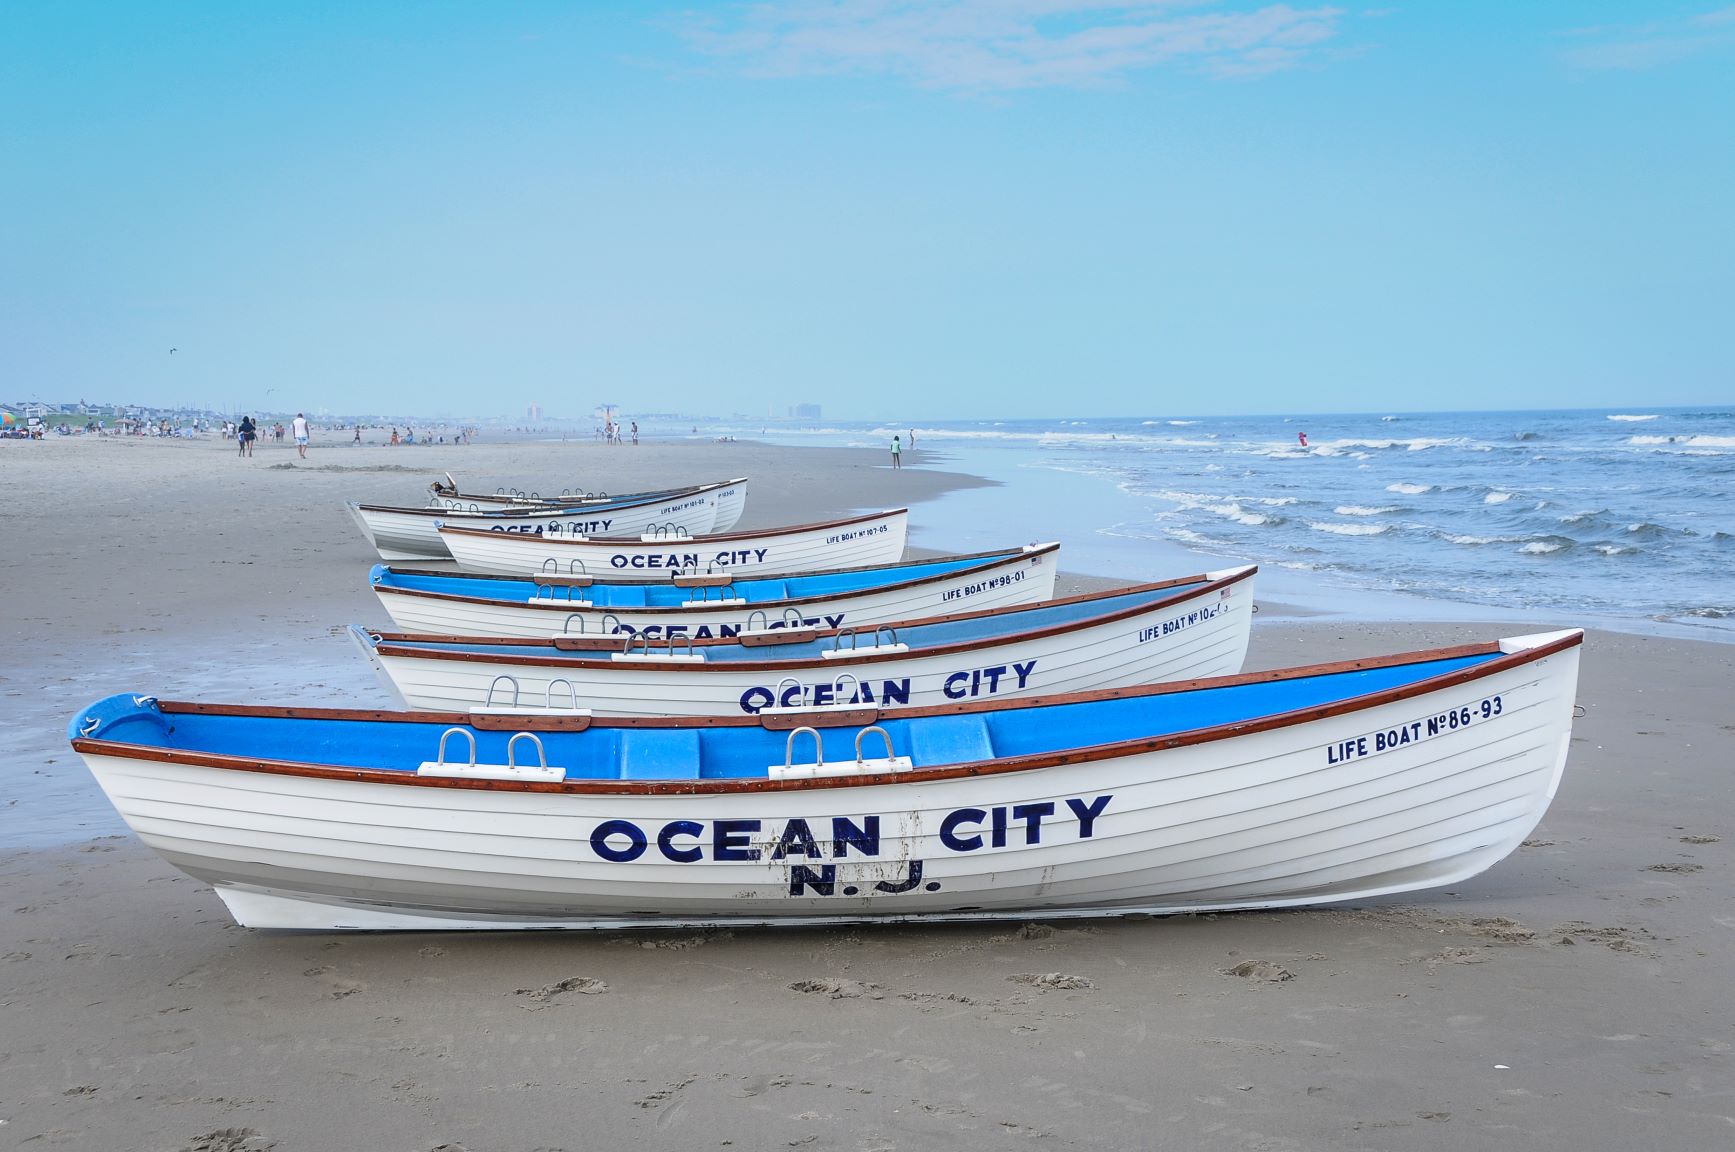 5 Exciting Festivals Worth Checking Out Near Ocean City, NJ